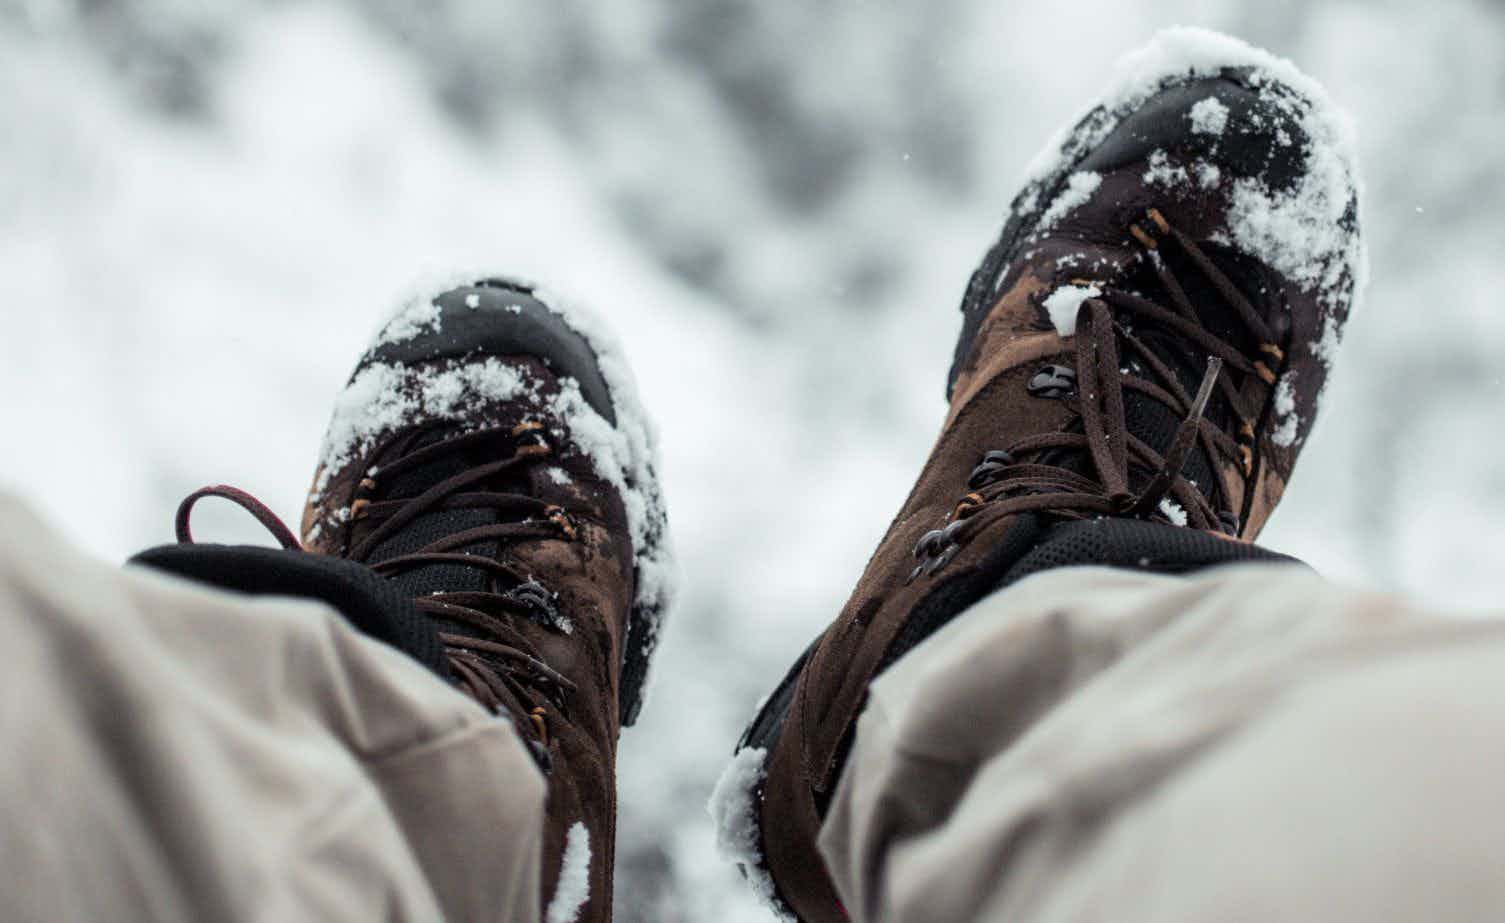 Best Winter Hiking Boots: What to Look for When Buying